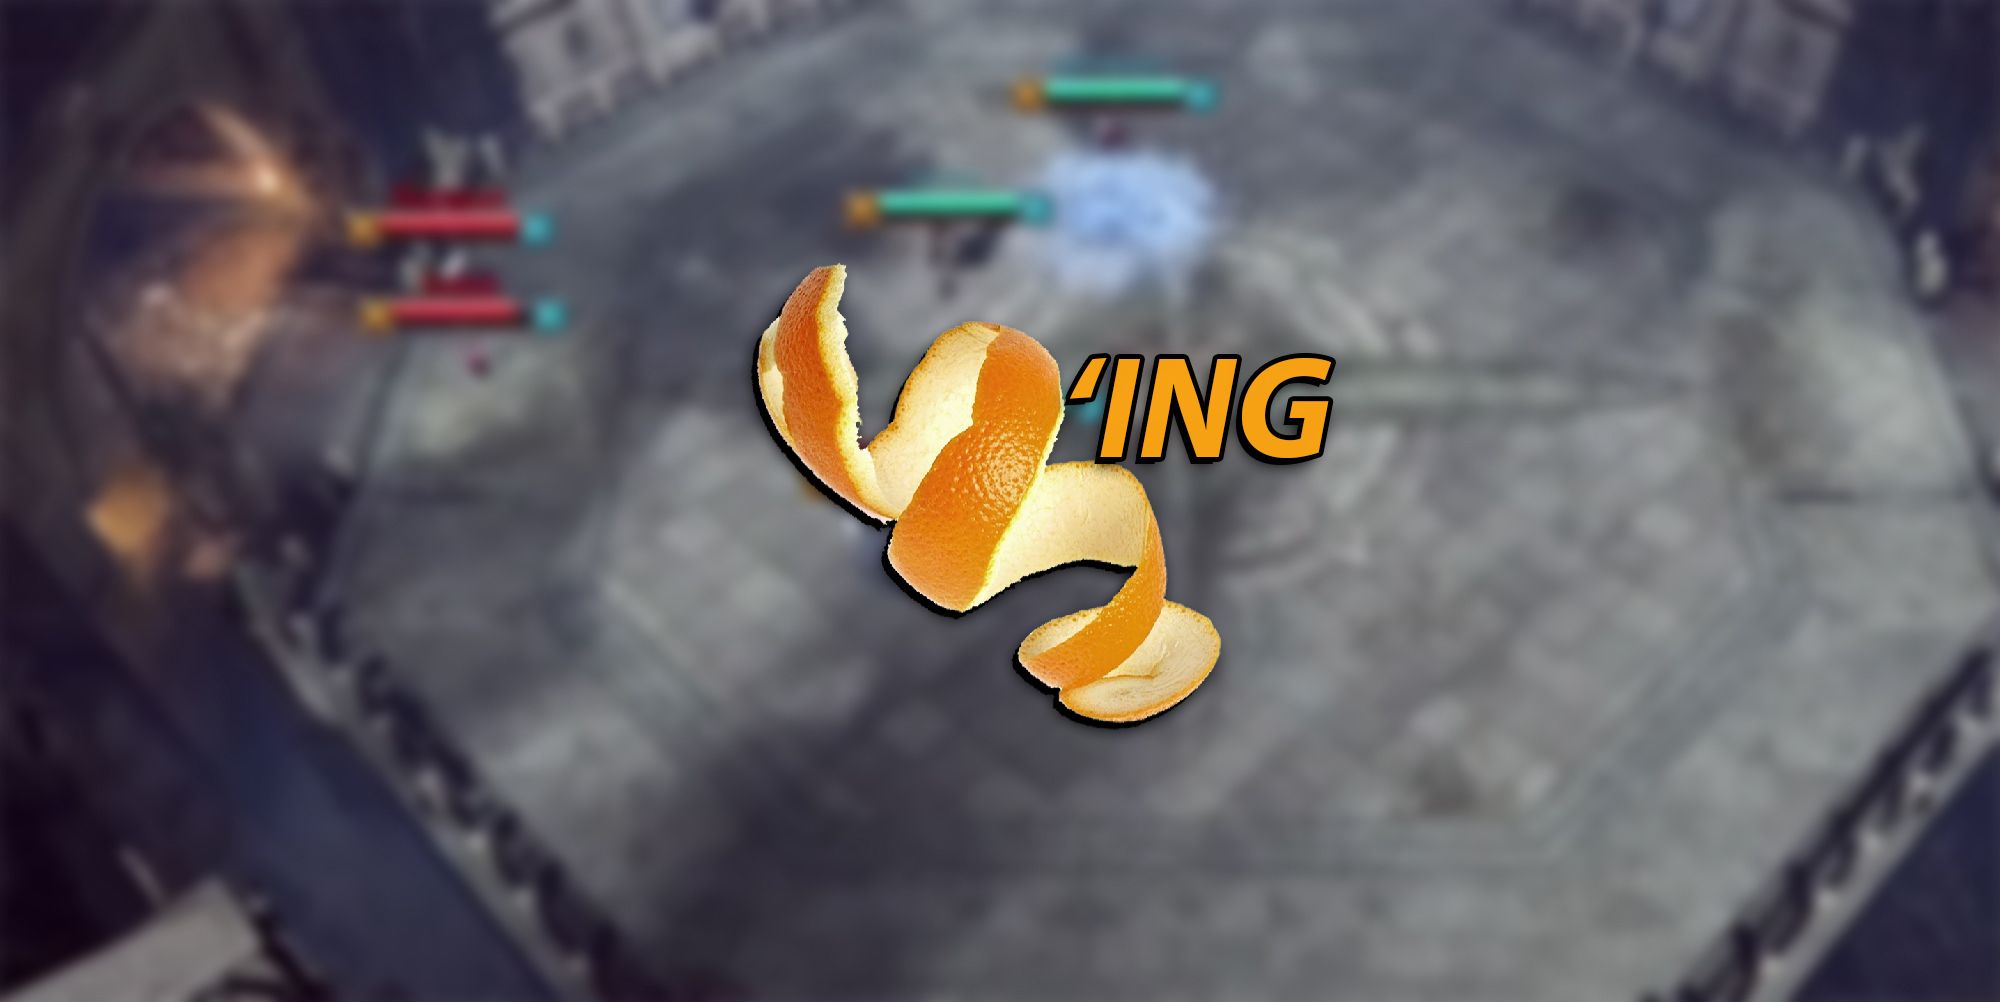 Lost Ark - An Orange Peel PNG Overlaid On Image Of Lost Ark PvP Showing A Character Peeling for their Team